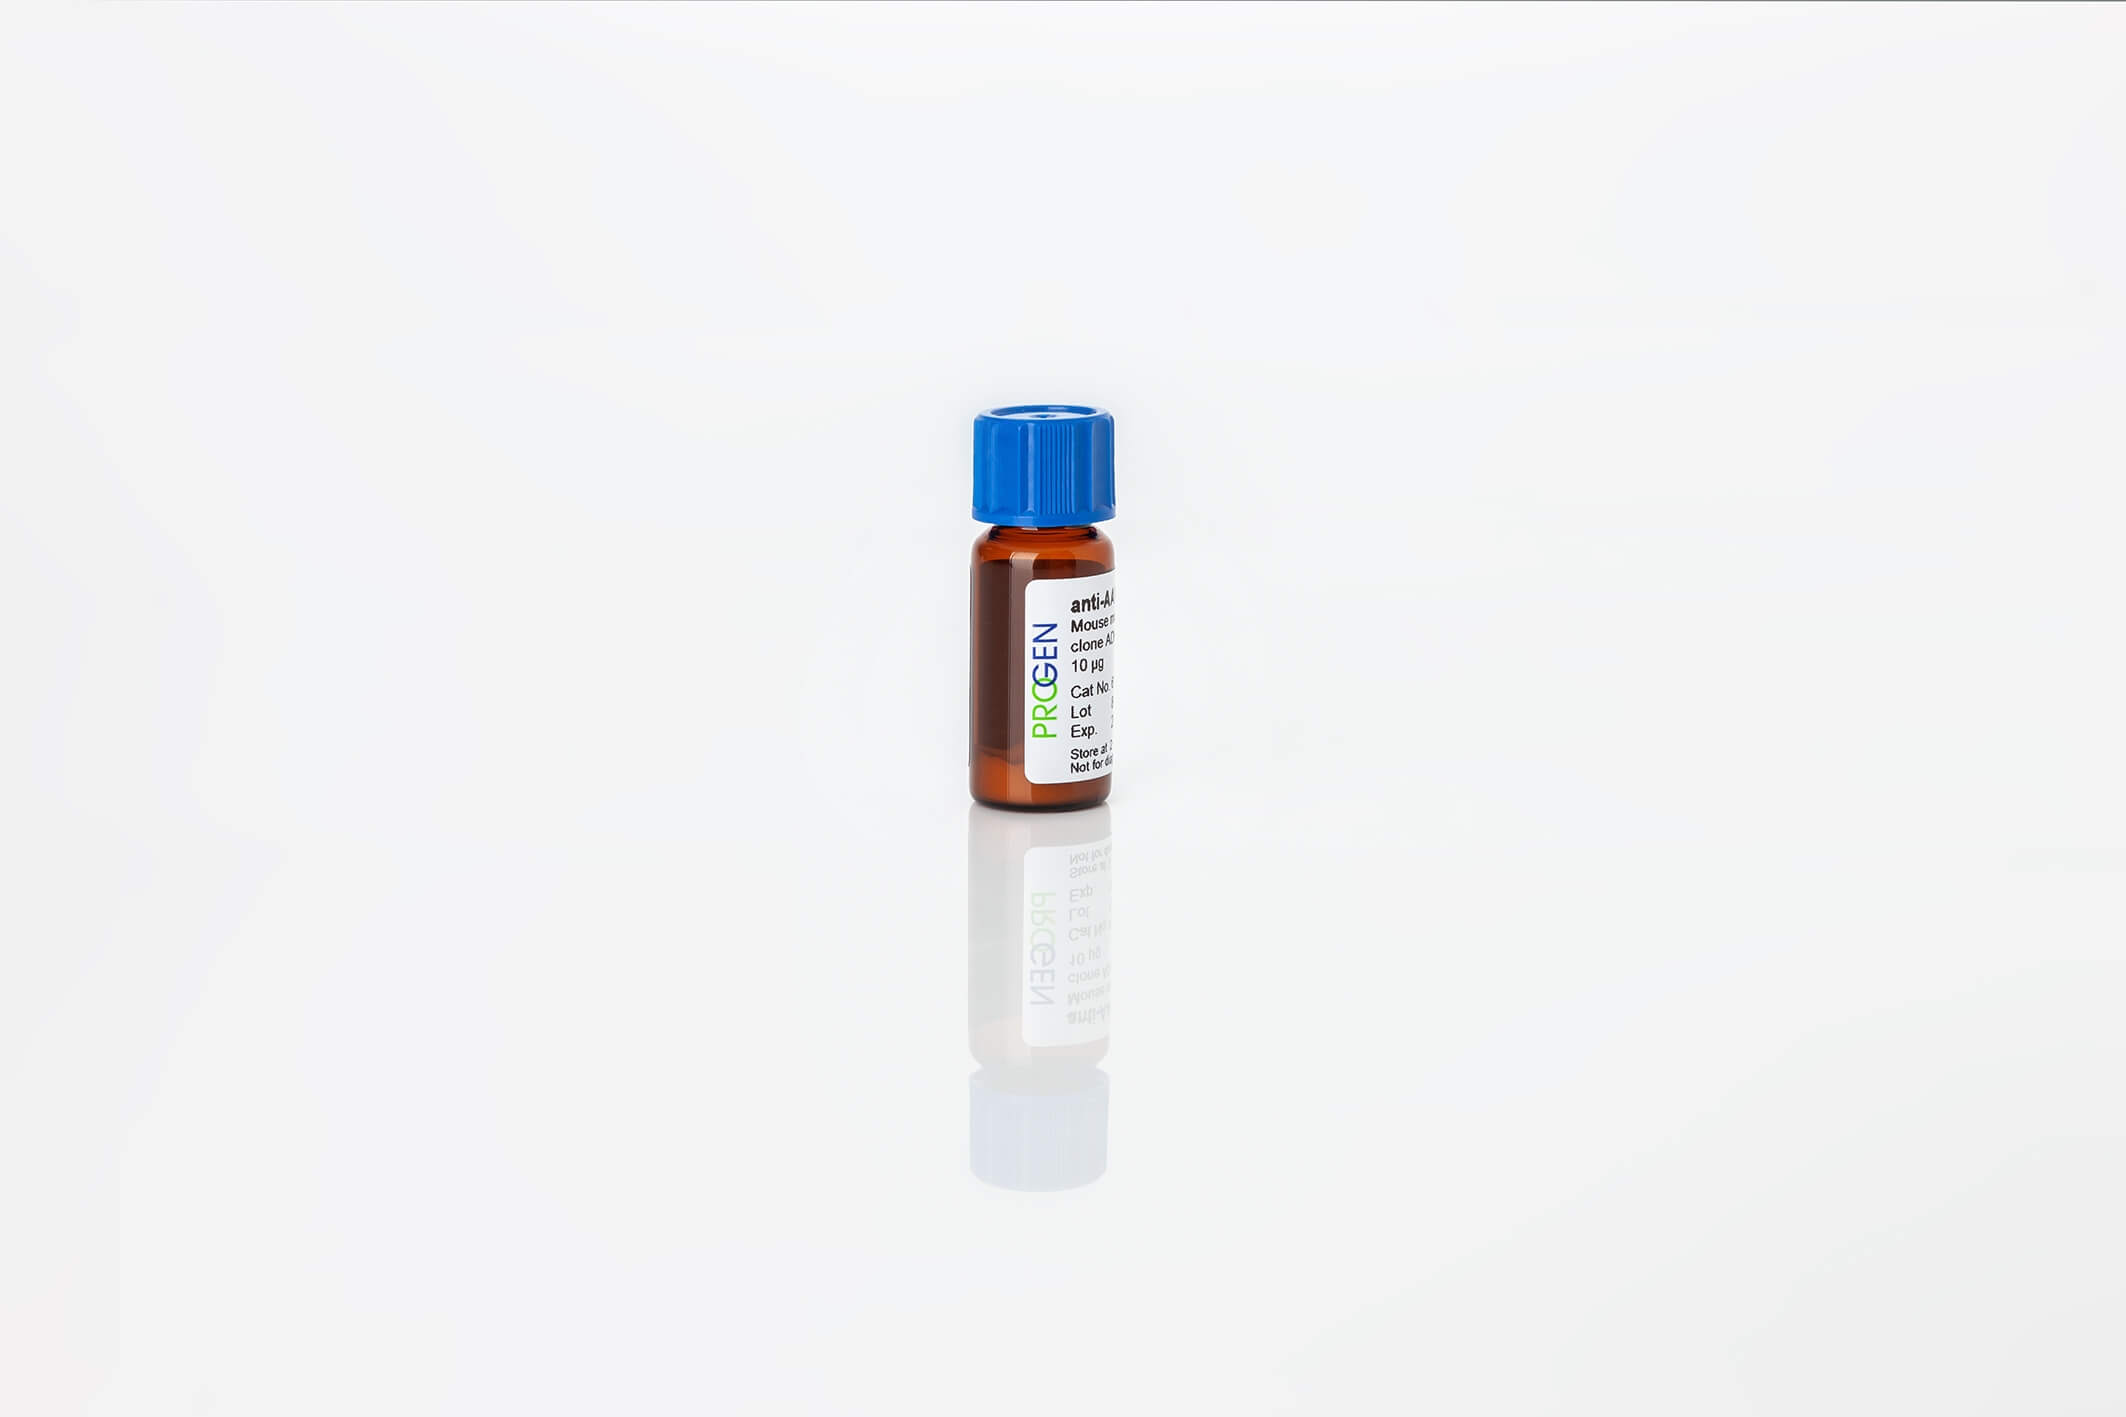 anti-Nucleoplasmic Protein AND-1 mouse monoclonal, 23-5-14, supernatant concentrate